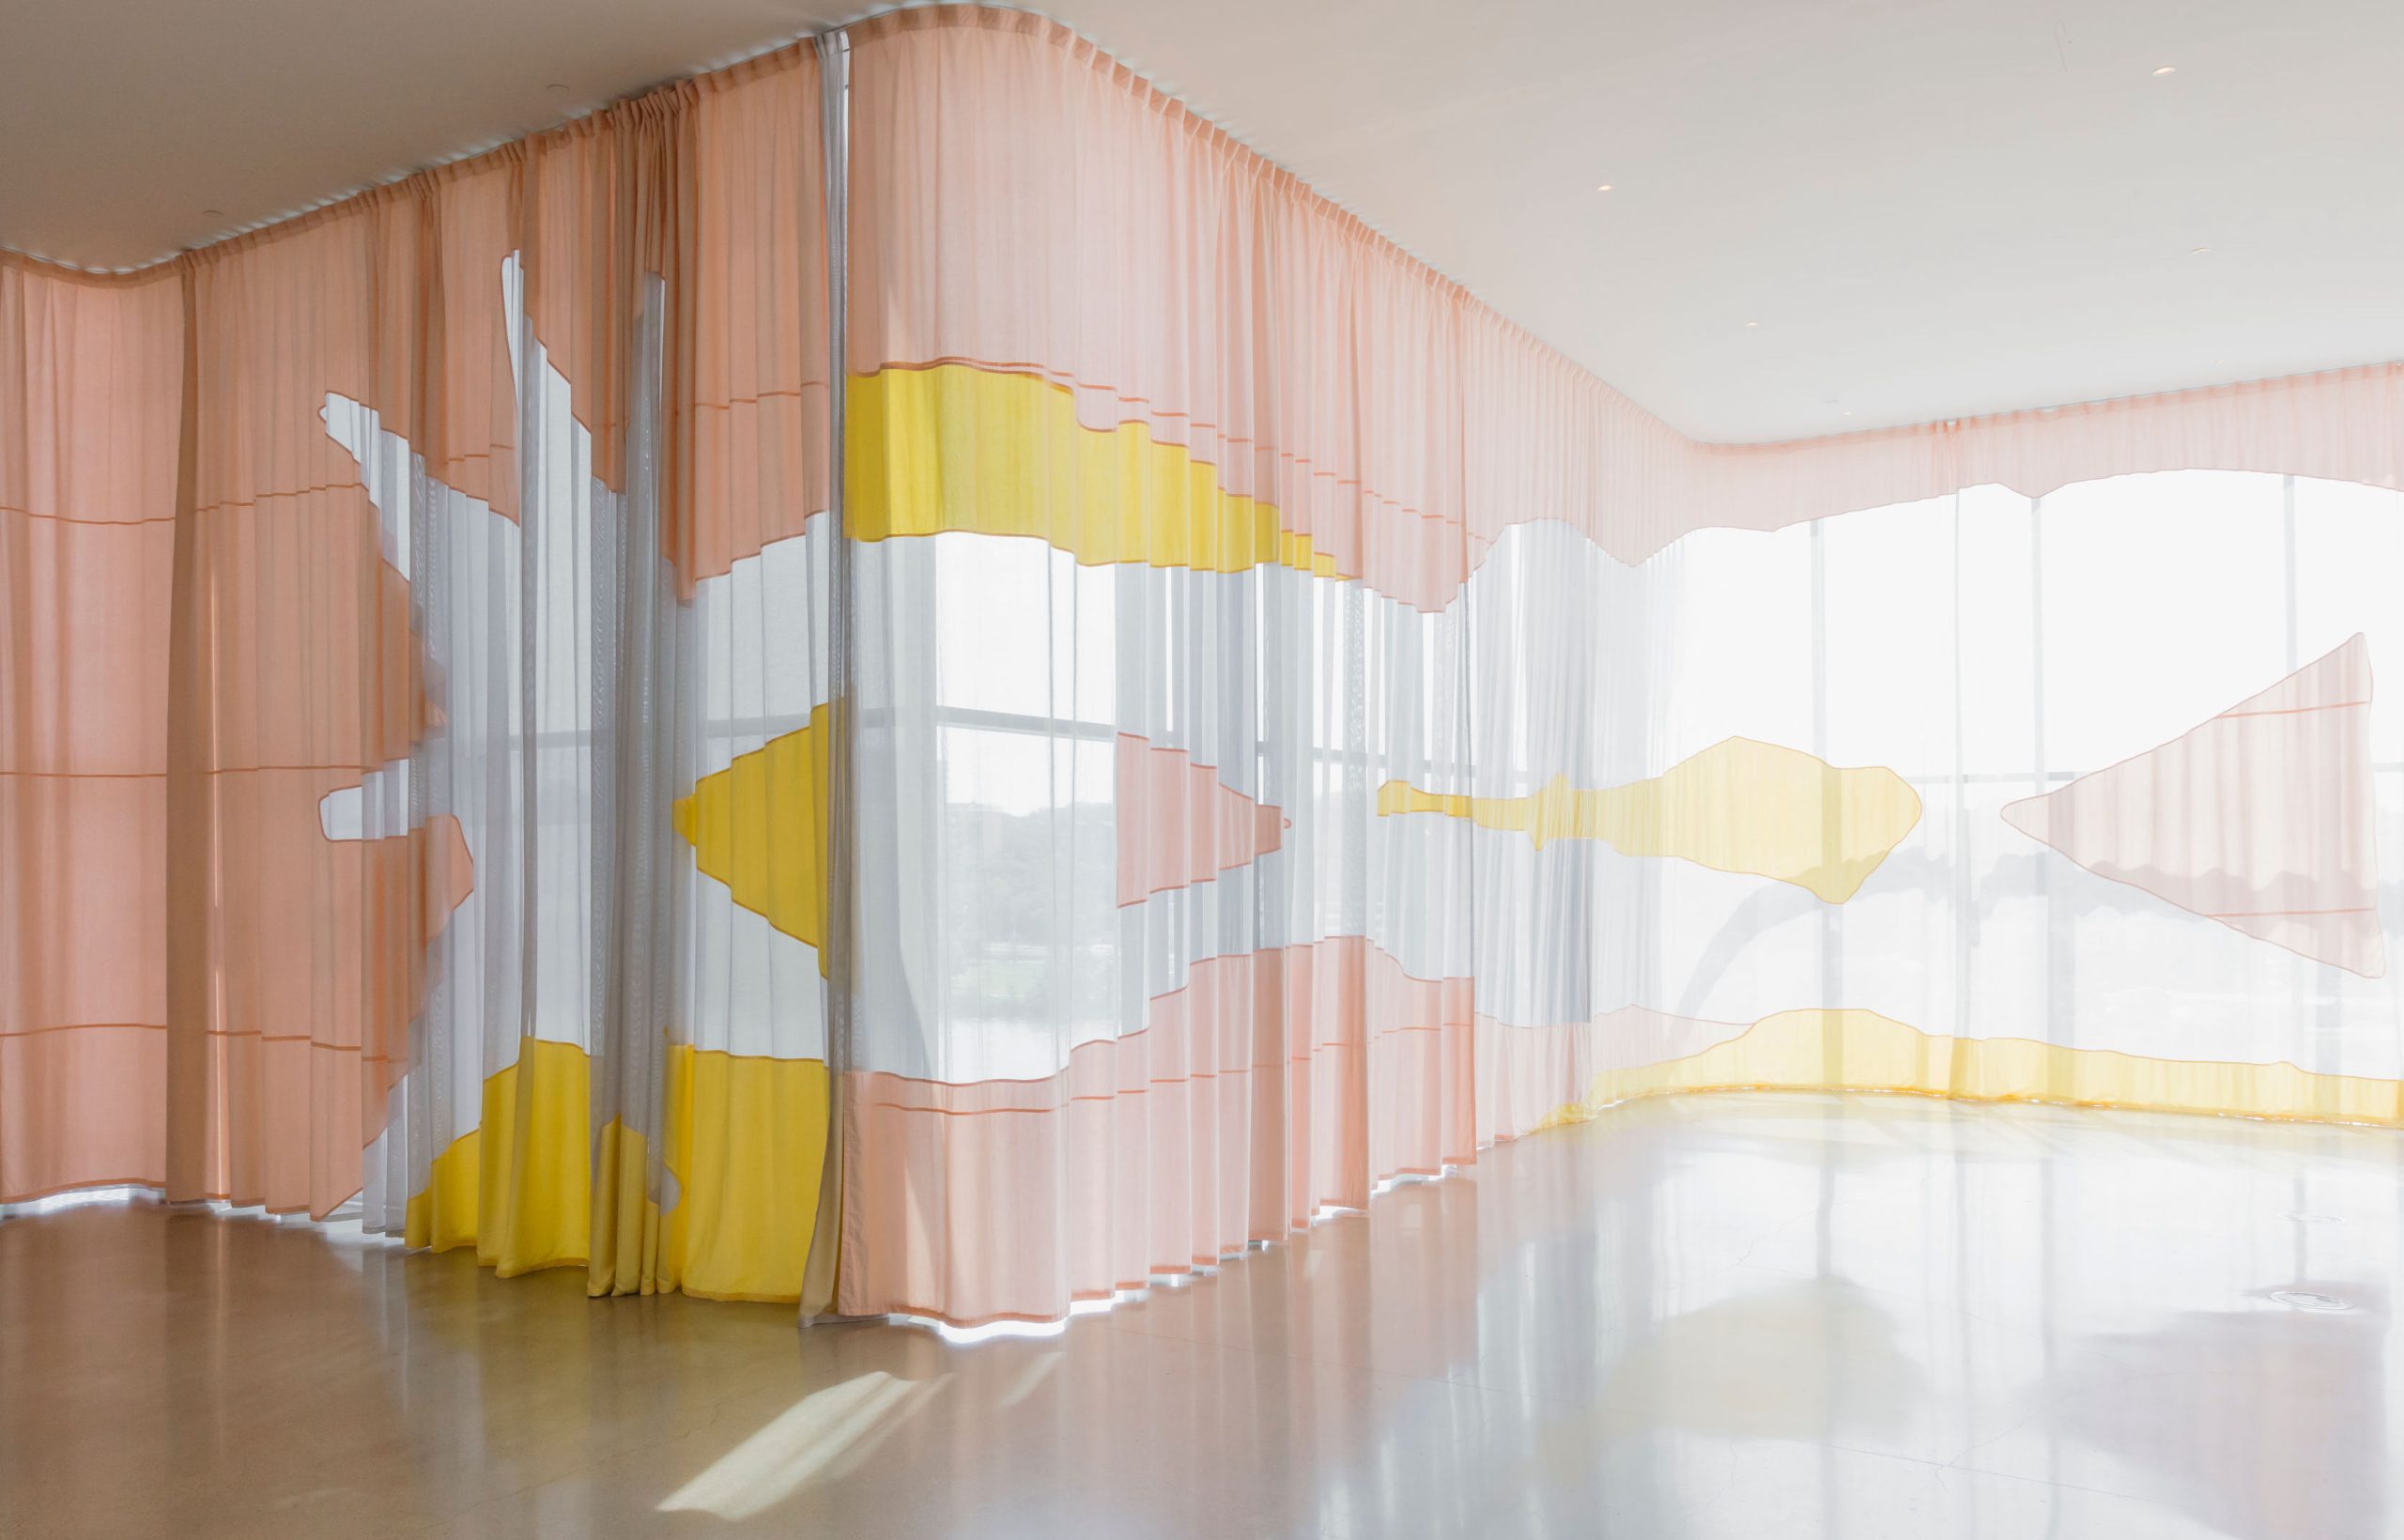 Installation view of a large textile piece by artist Celine Condorelli